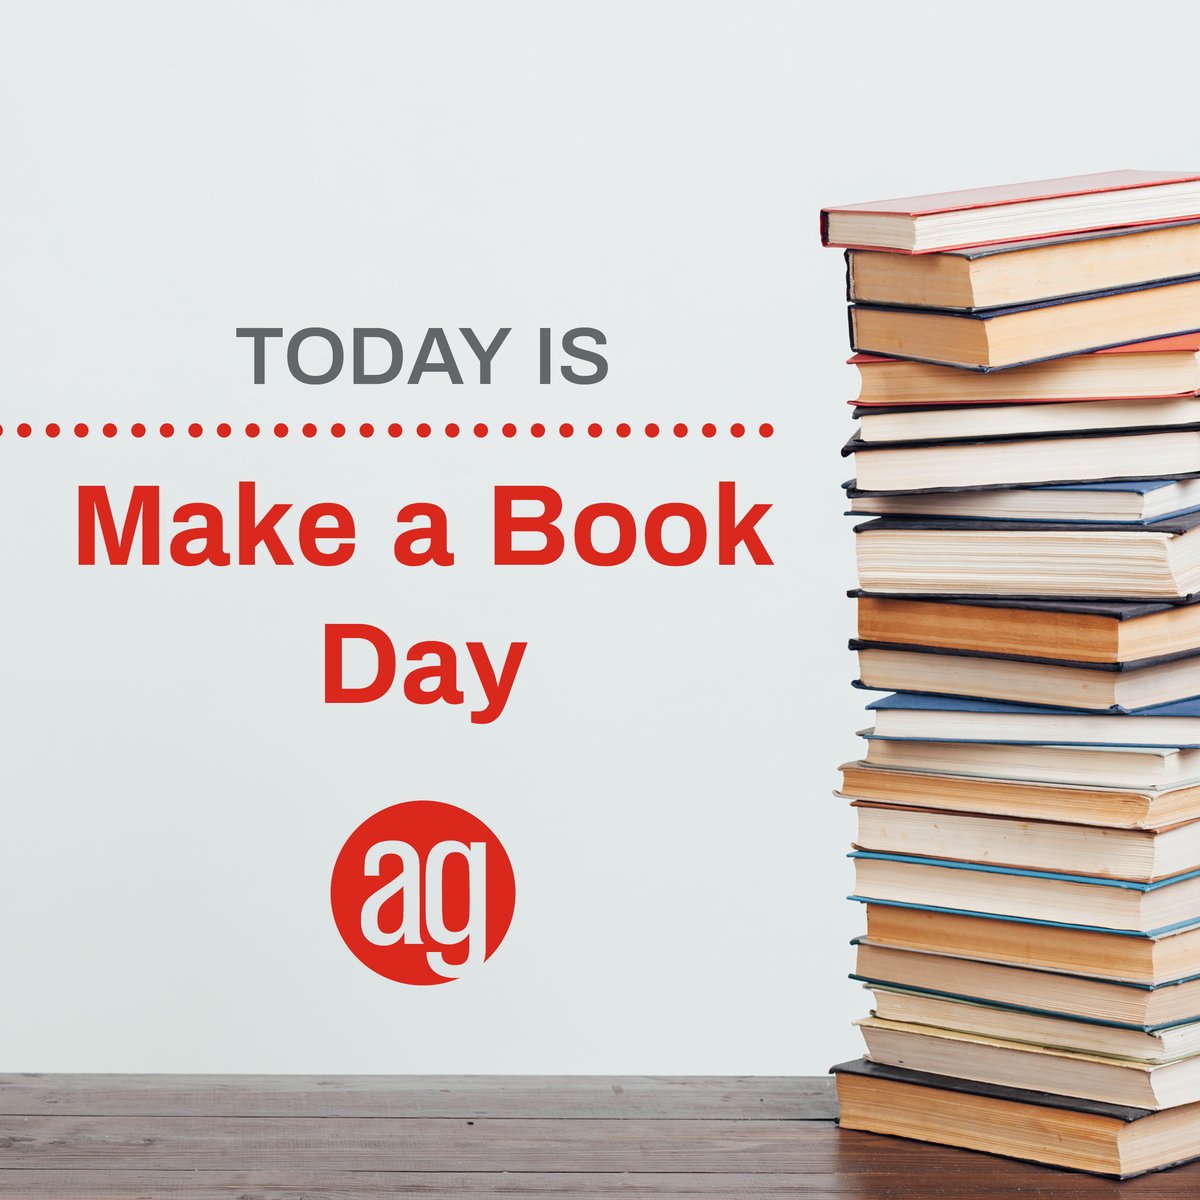 Today is Make-a-Book Day! A lot of authors are ditching impersonal corporate publishers for self-publishing. Our marketing specialists can help with layout, design, cover content, and binding.

b.link/book-publishing 

#MakeABookDay #SelfPublish #BookBinding #QualityPrinting